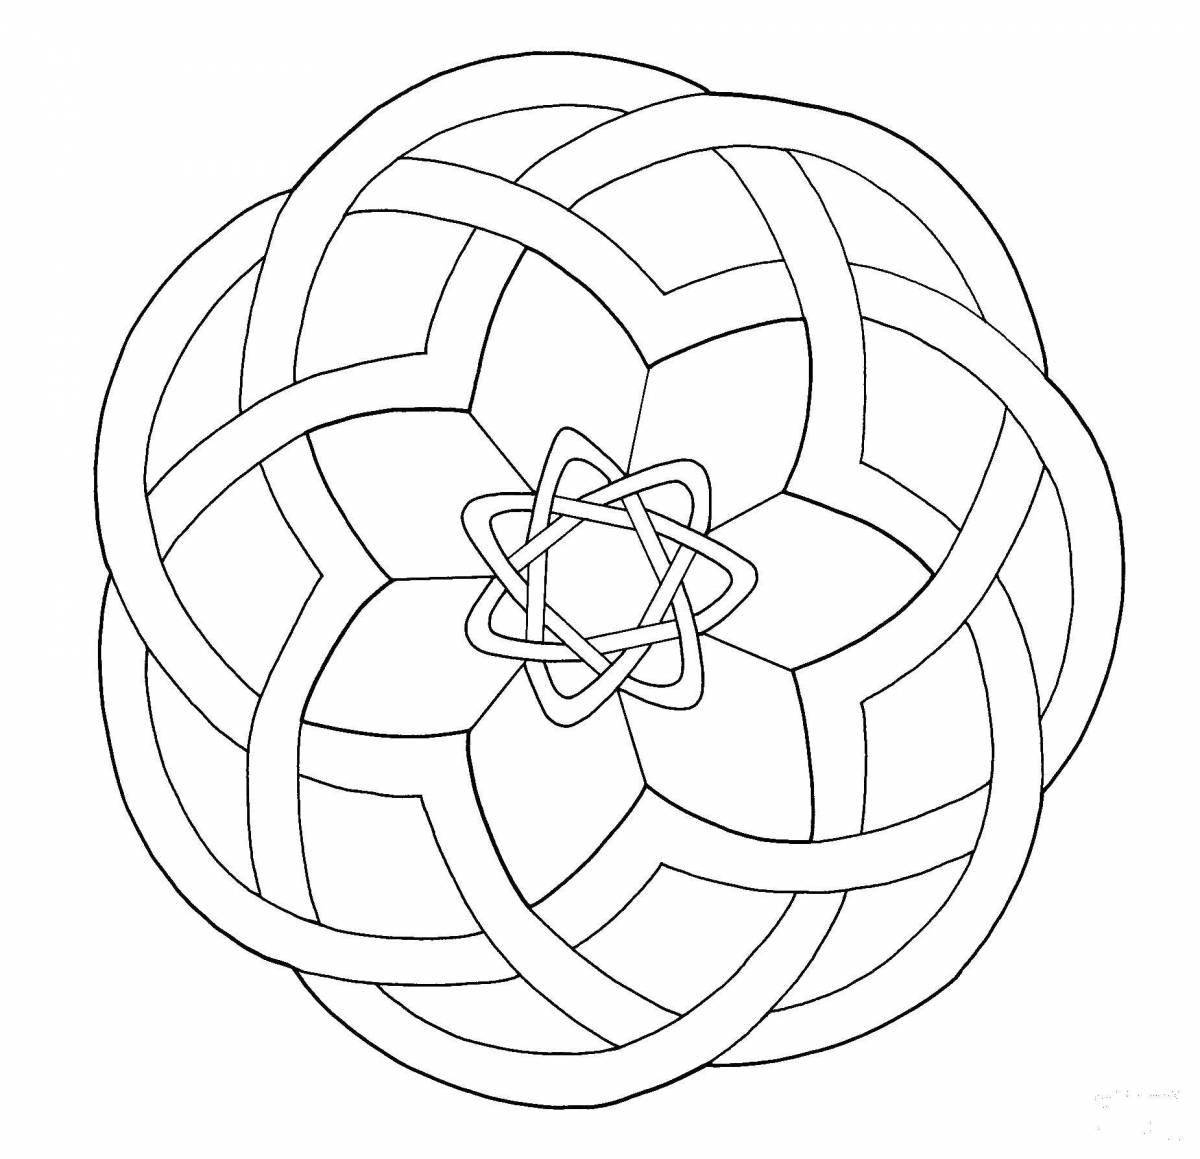 Coloring page with ornate light pattern